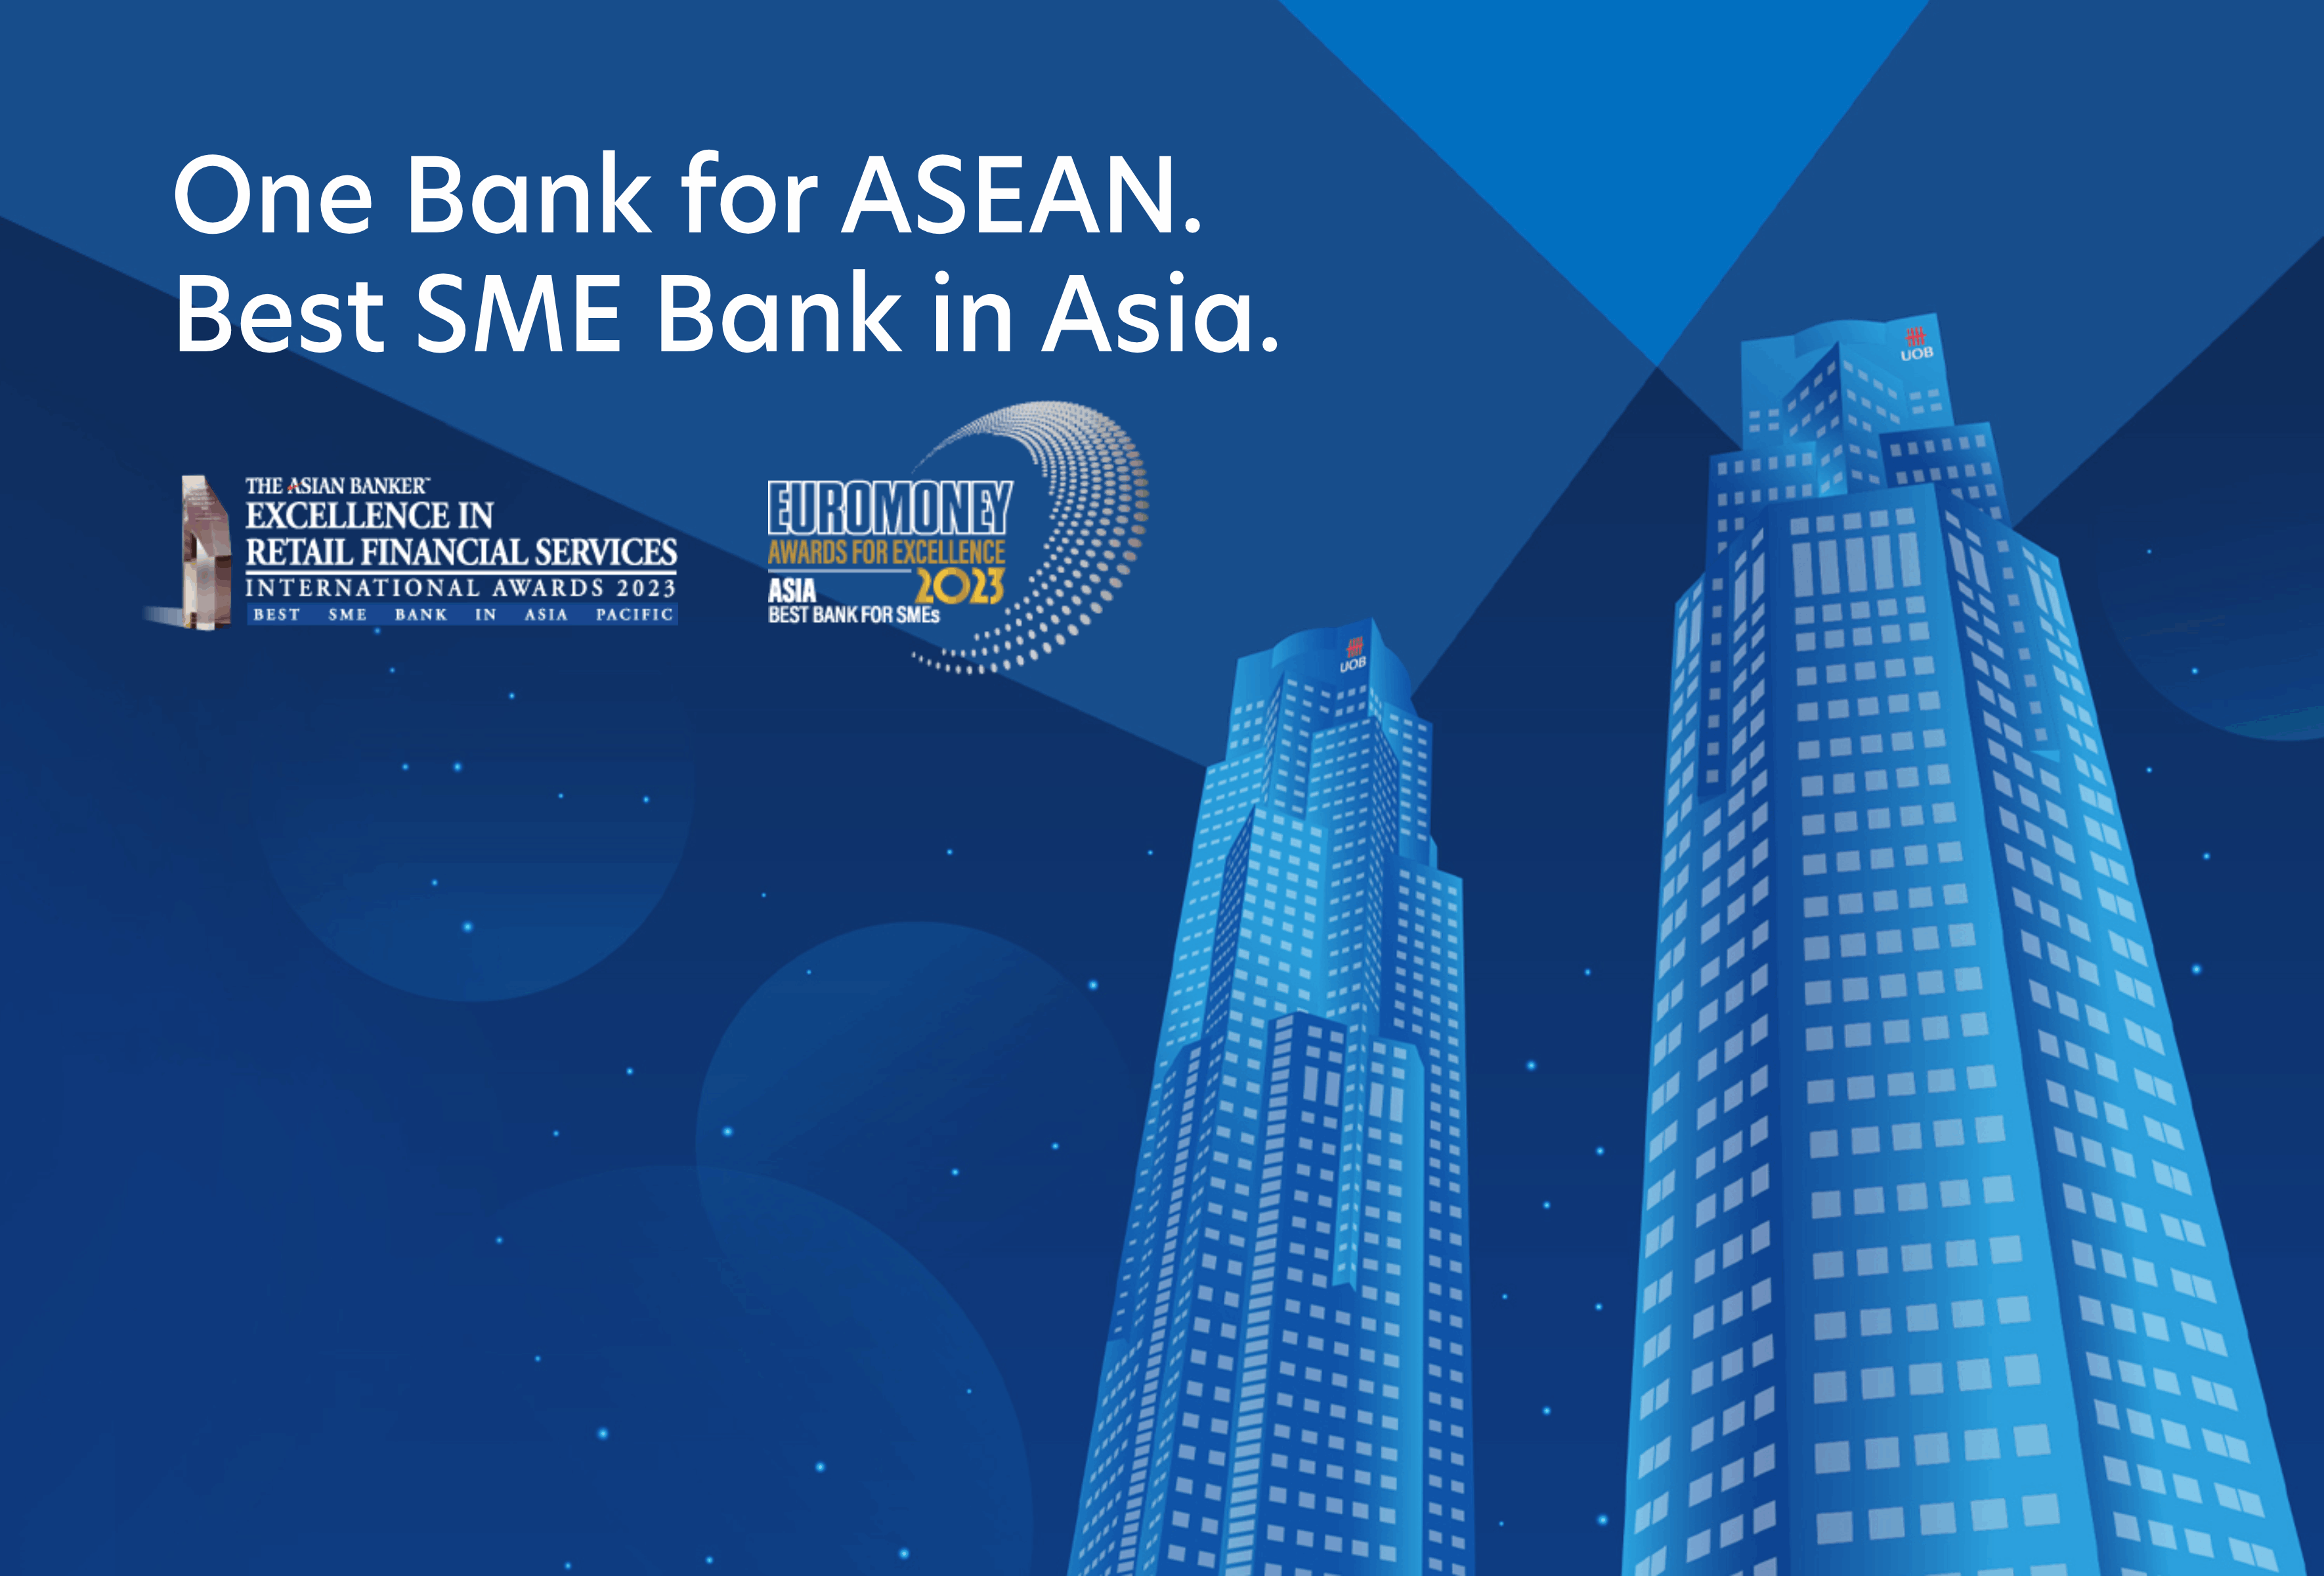 One Bank For ASEAN. Best SME Bank in Asia